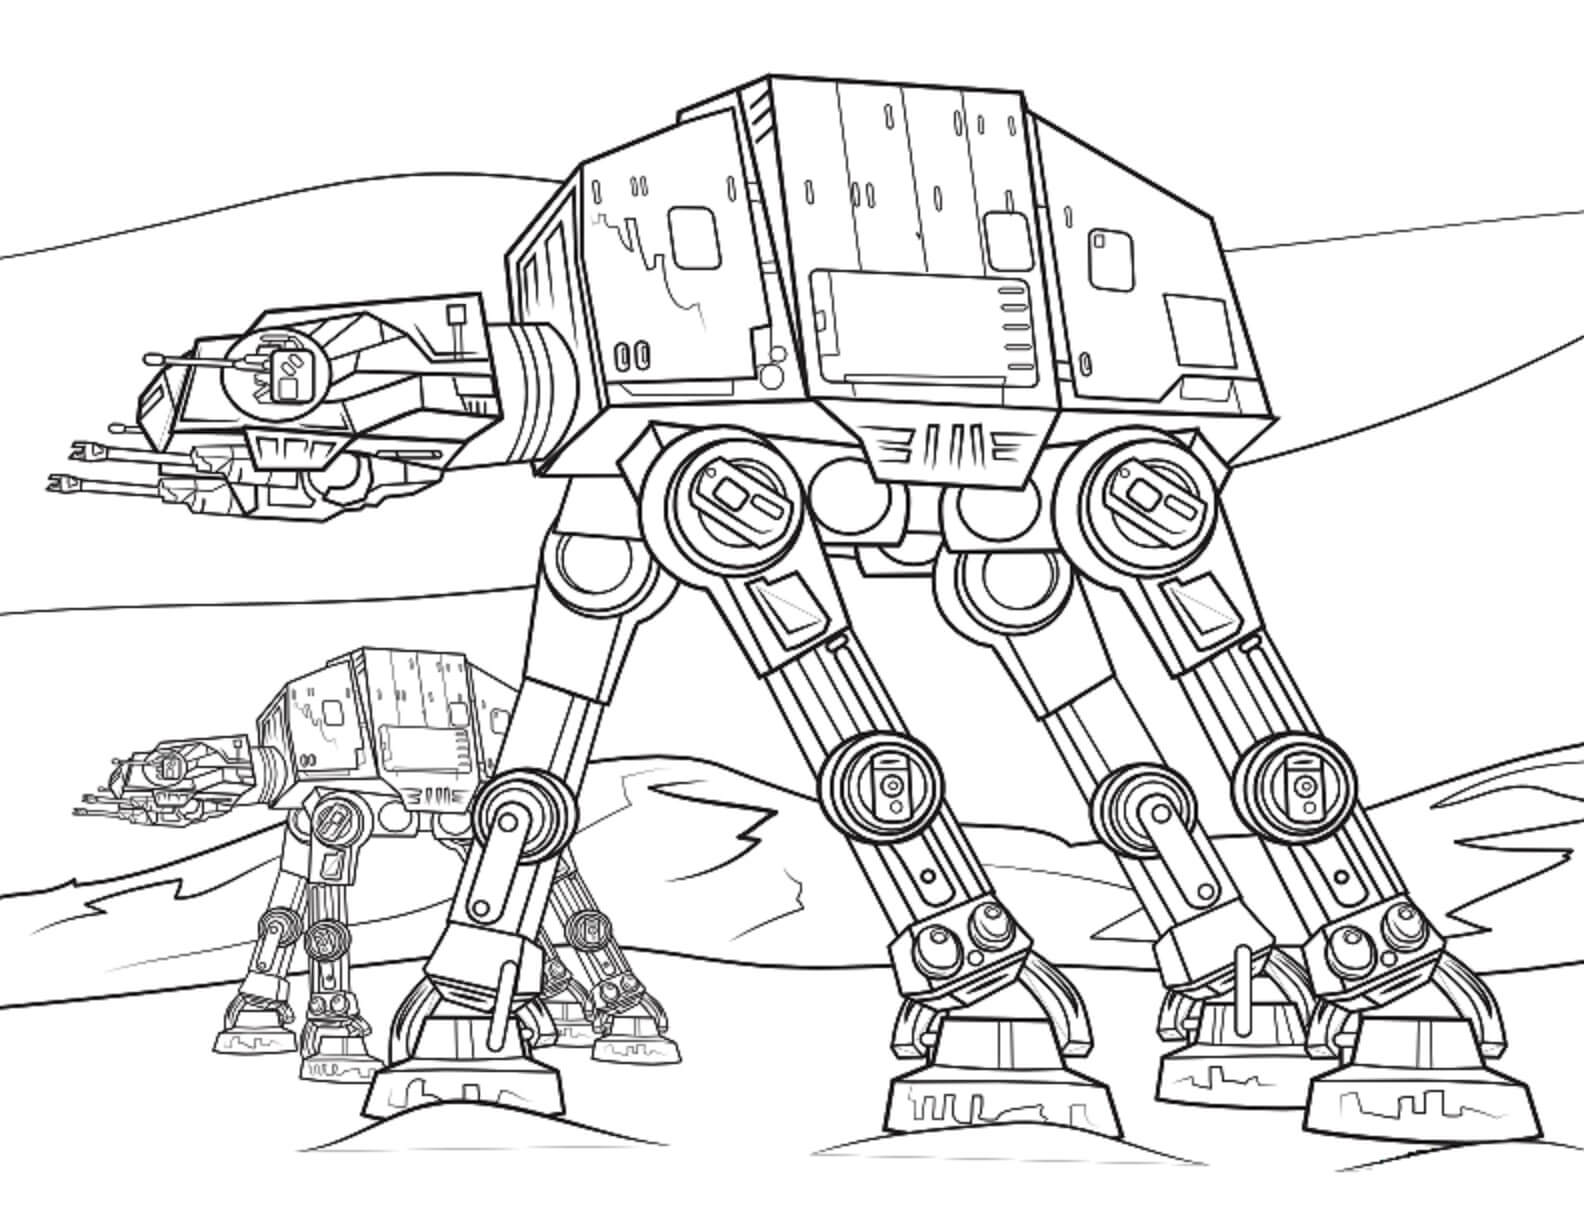 TB-TT Star Wars coloring page